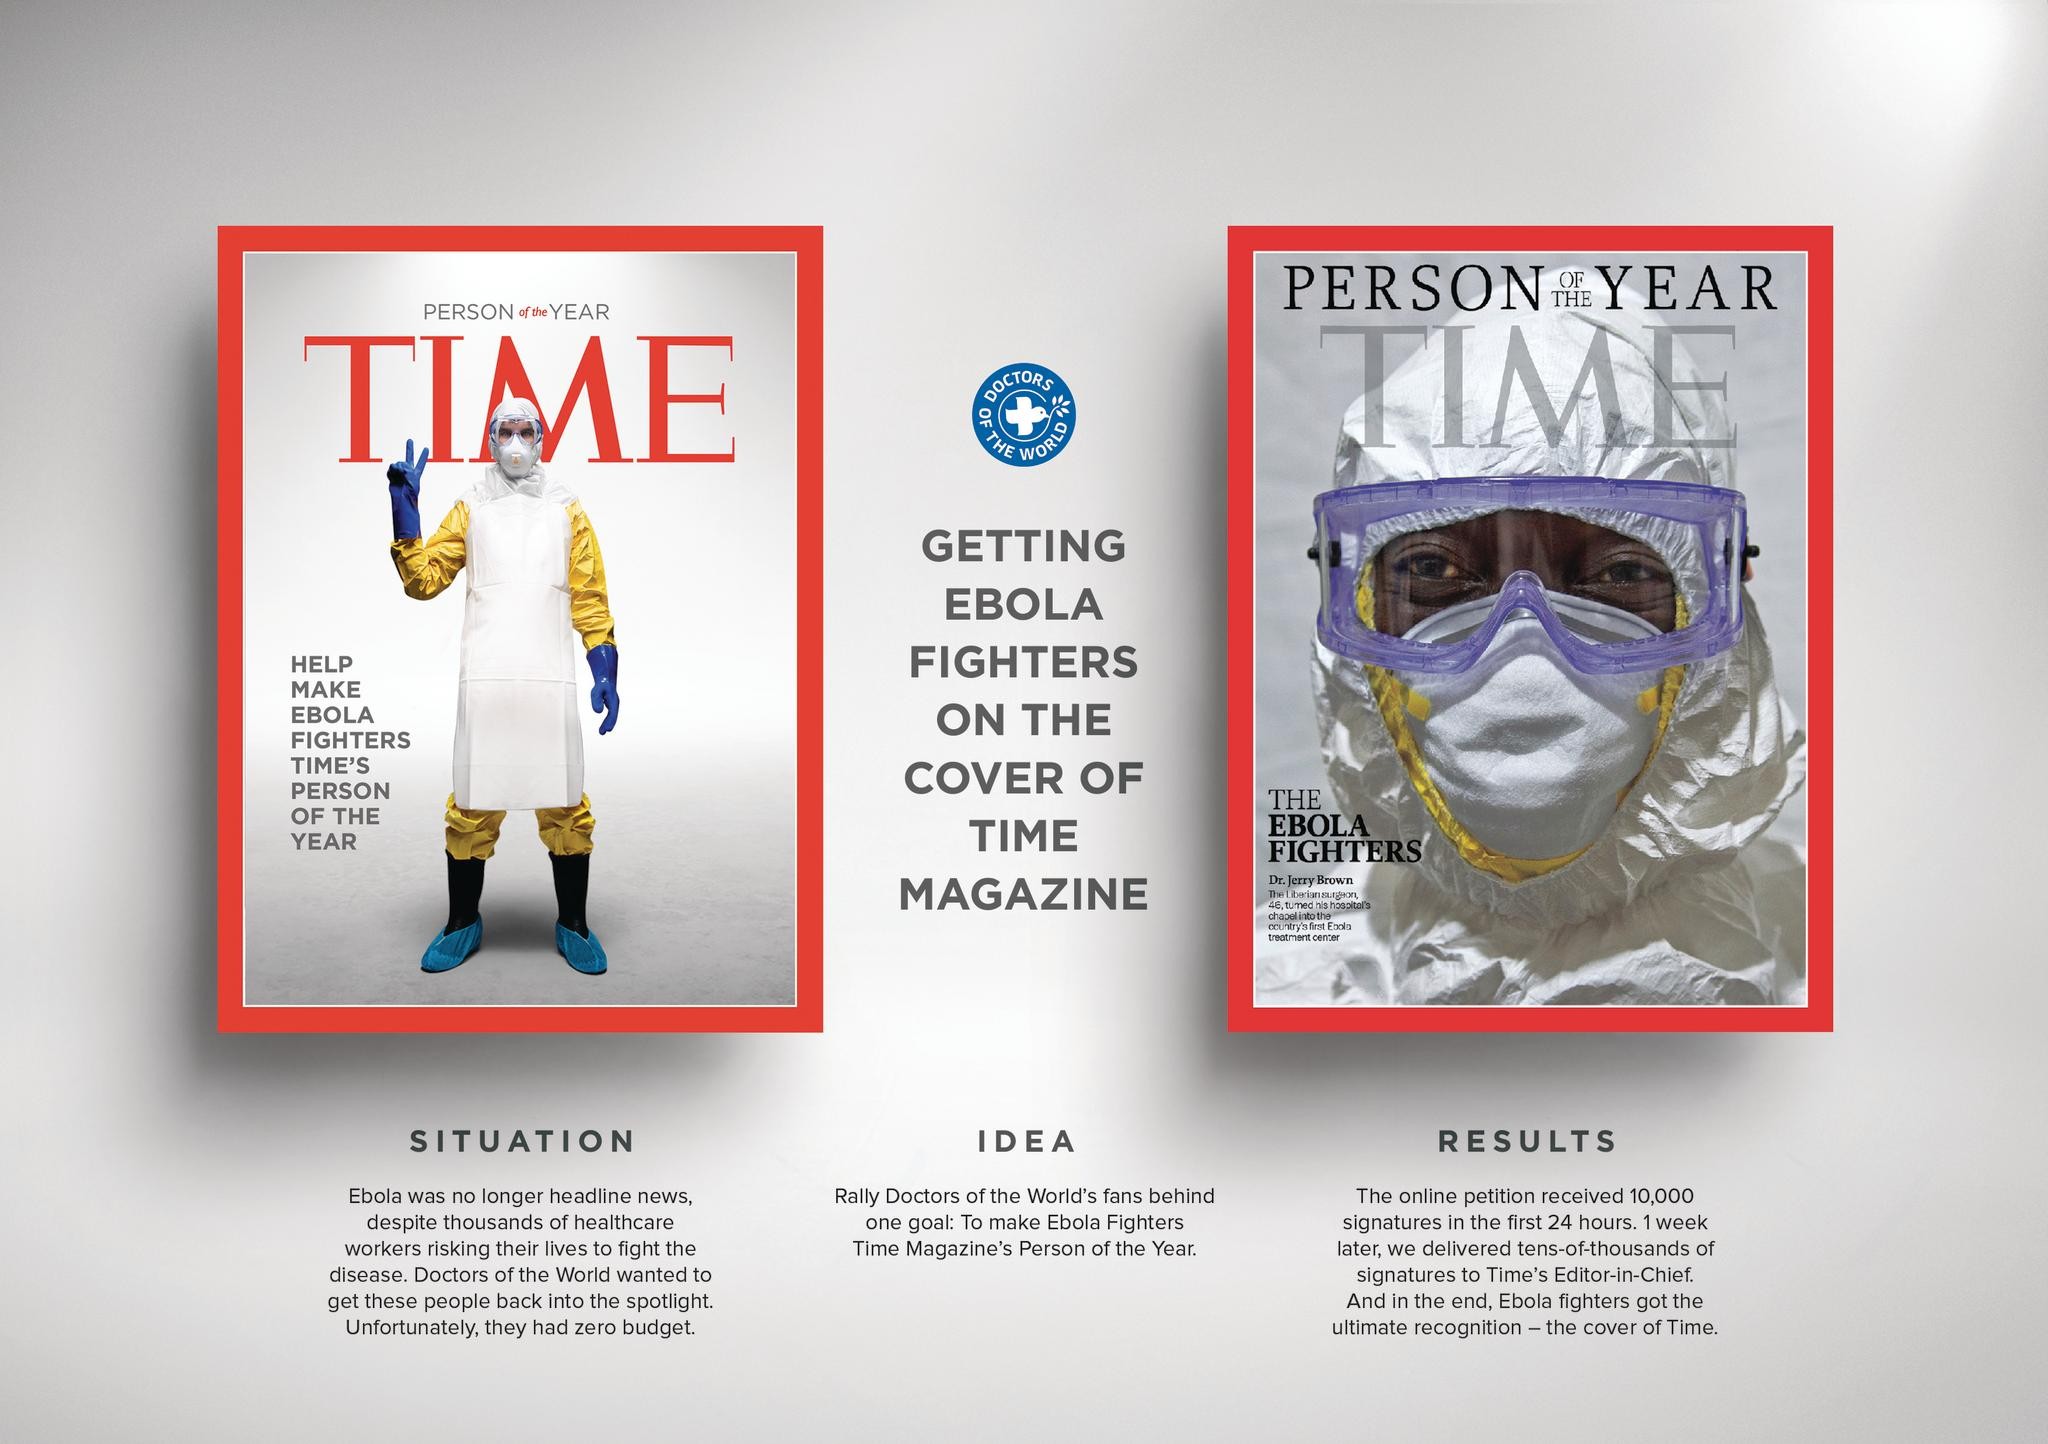 GETTING EBOLA FIGHTERS ON THE COVER OF TIME